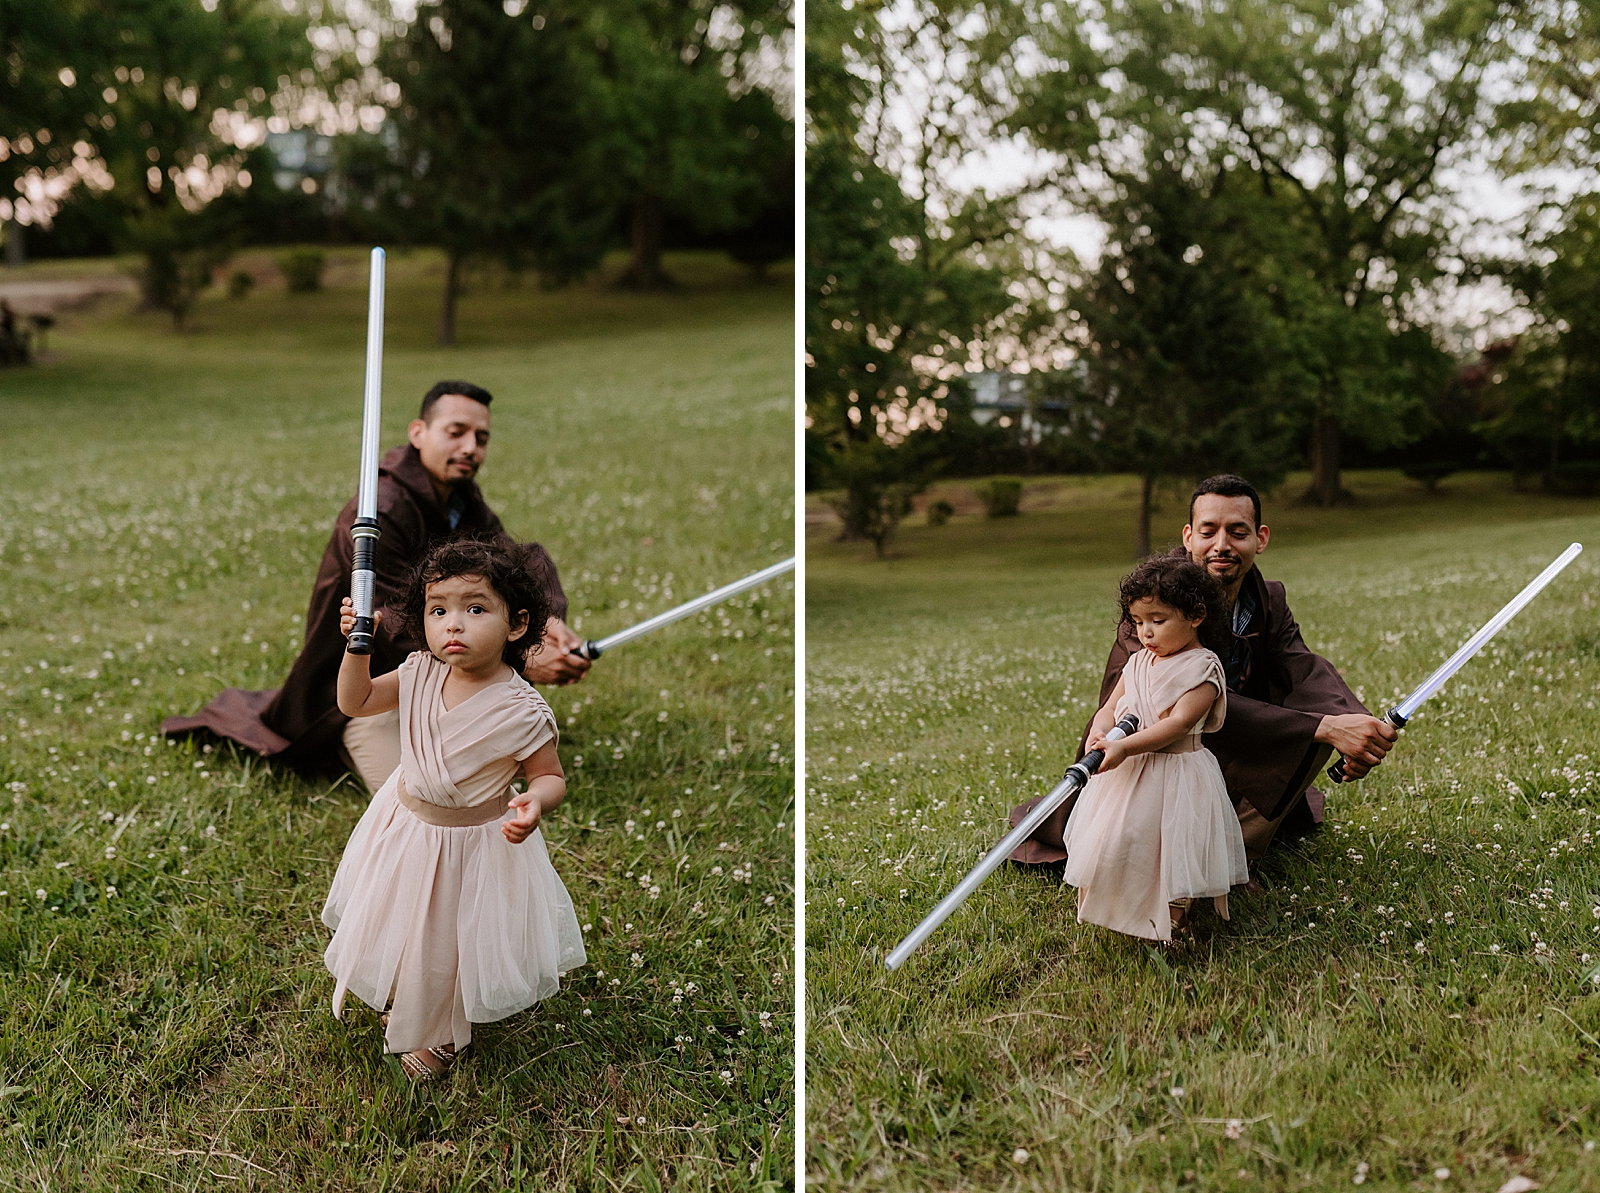 Dad crouching down with lightsaber in front of toddler with lightsaber on grass field